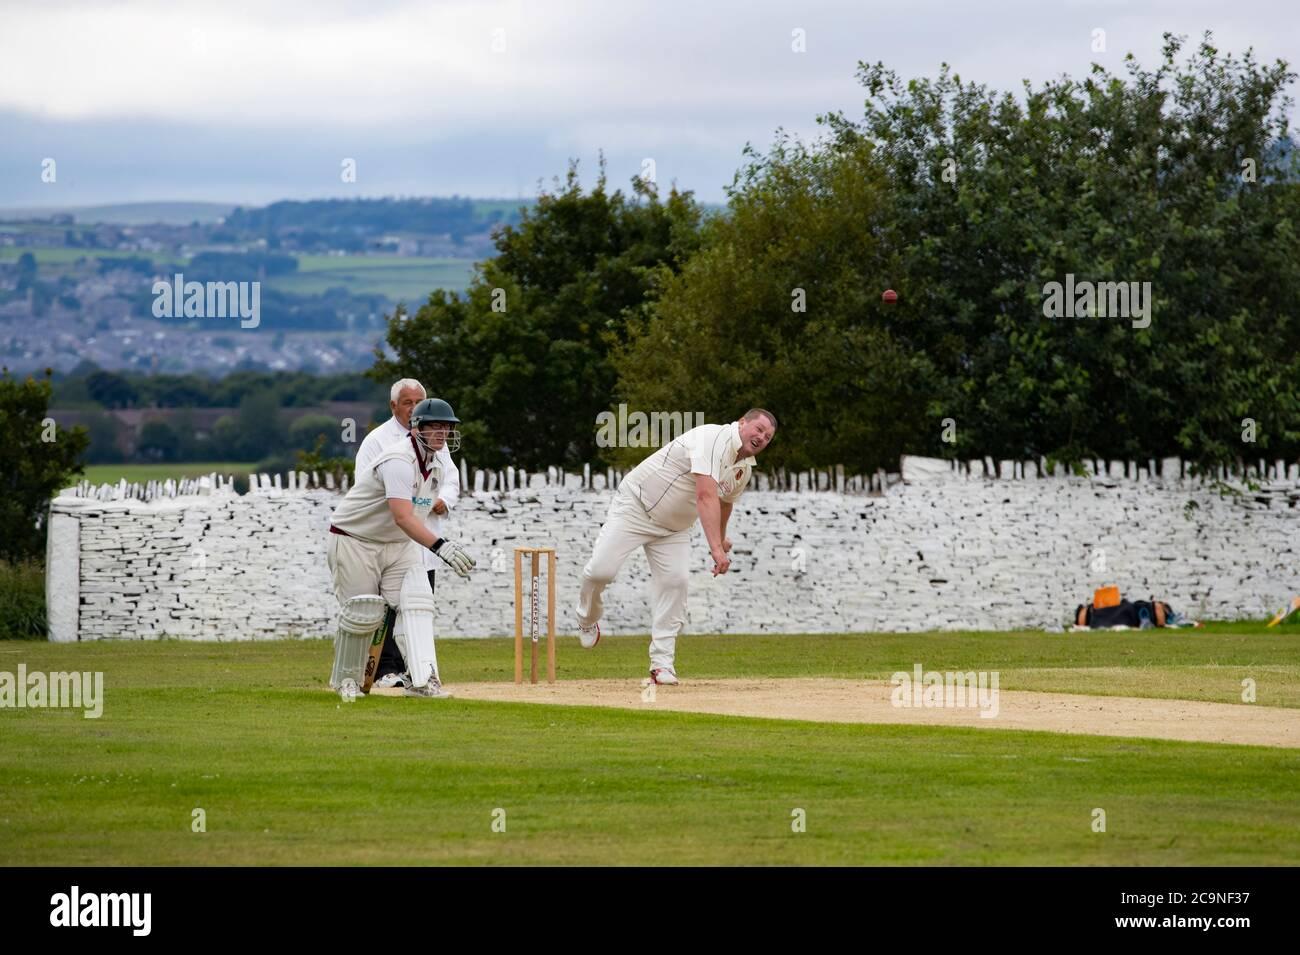 Medium paced bowler in a village cricket match bowling a delivery